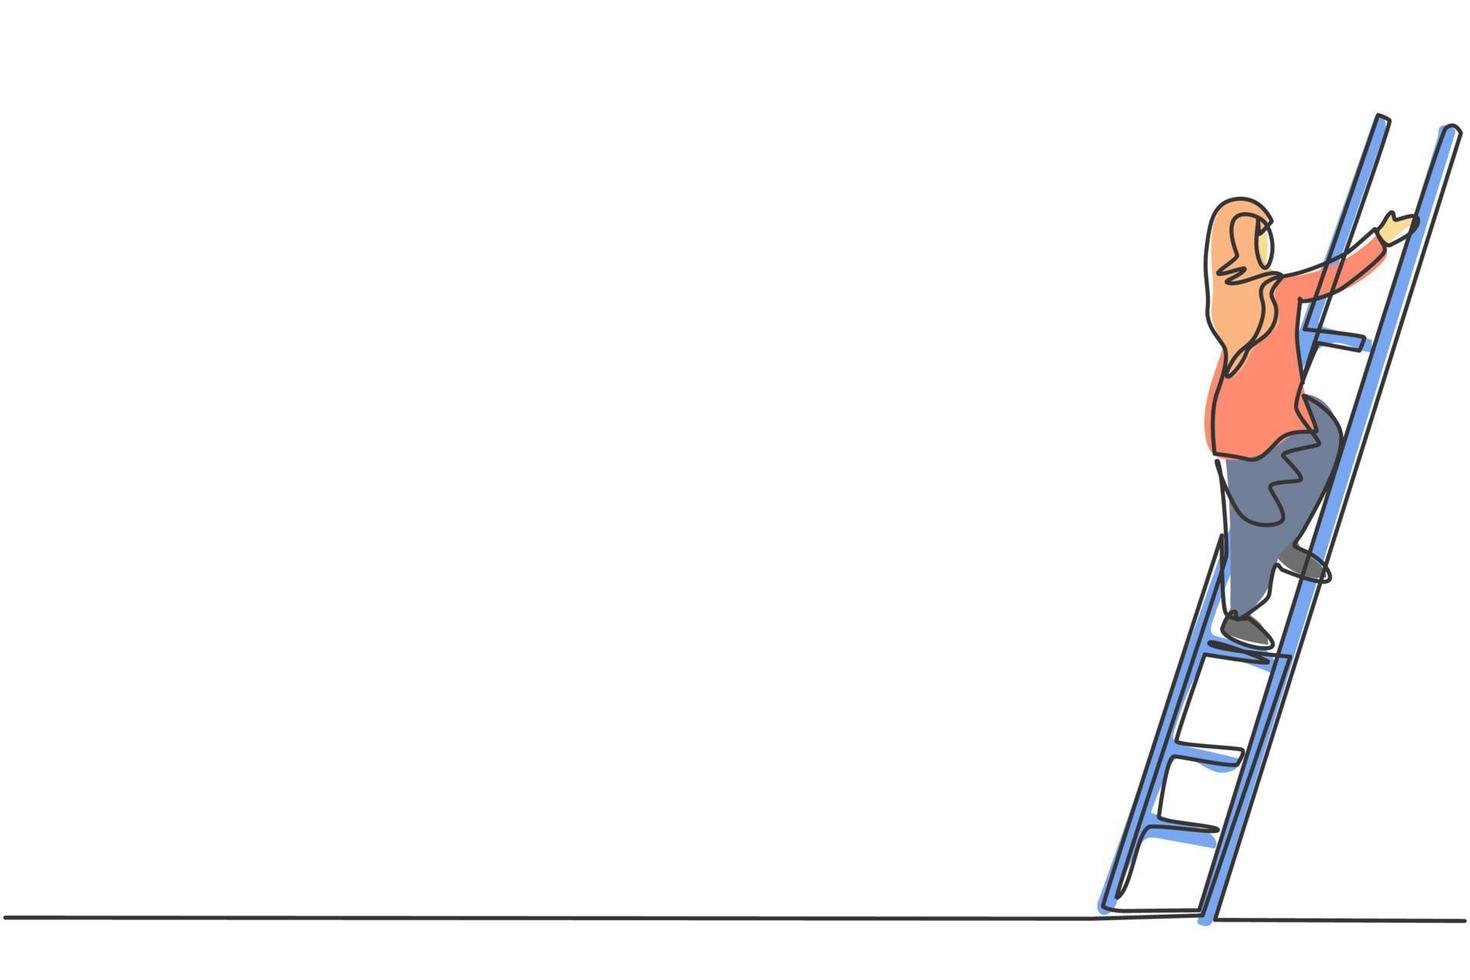 Single one line drawing of young smart Arab business woman climb the ladder up carefully, metaphor. Business growth minimal concept. Modern continuous line draw design graphic vector illustration